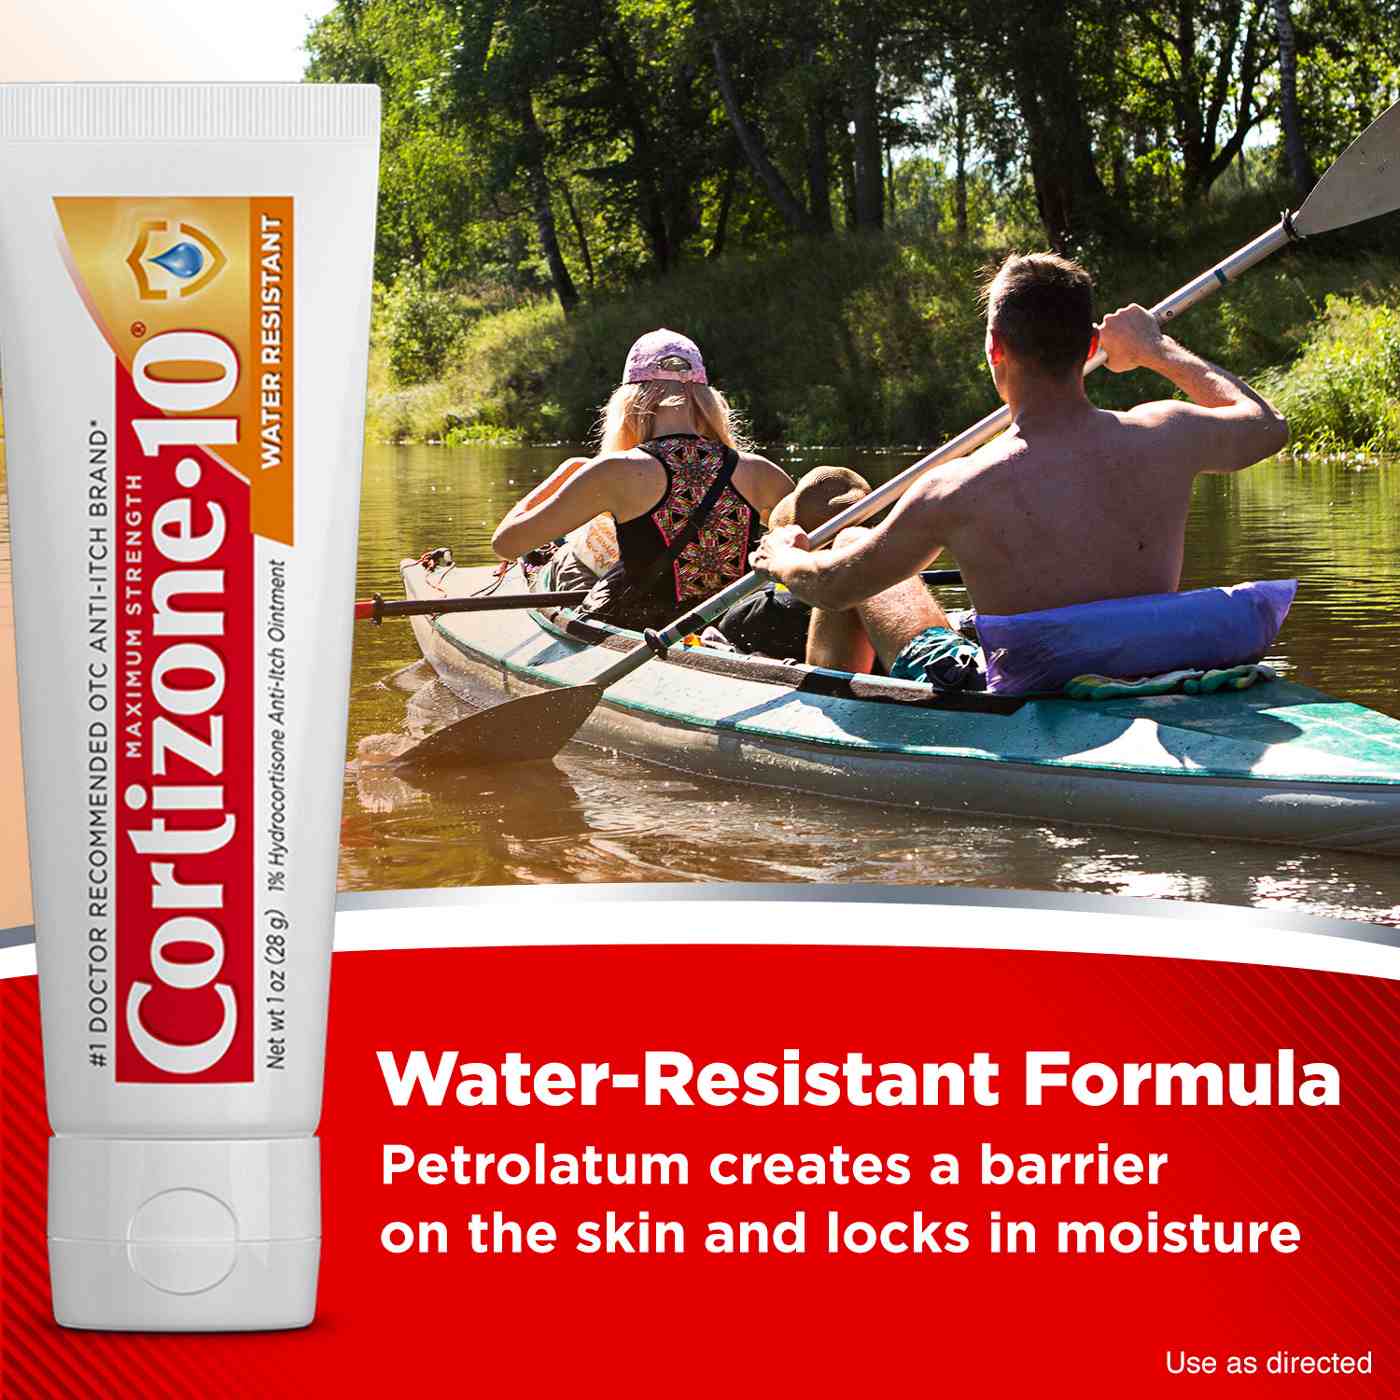 Cortizone 10 Water Resistant Anti-Itch Ointment; image 6 of 8